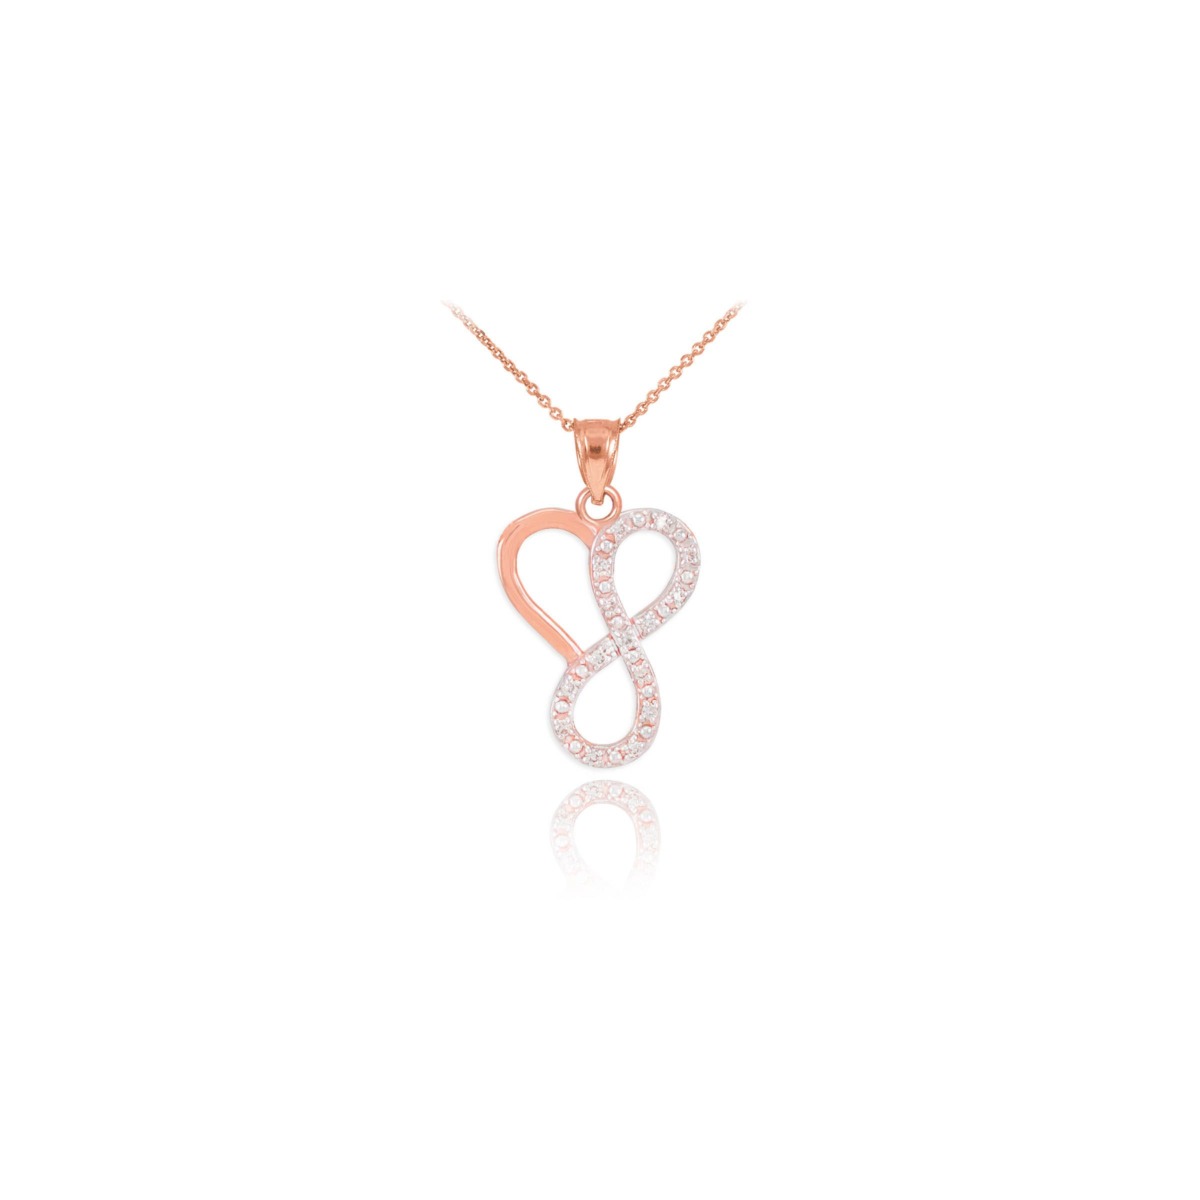 Gold Boutique - Necklace in Rose GOOFASH